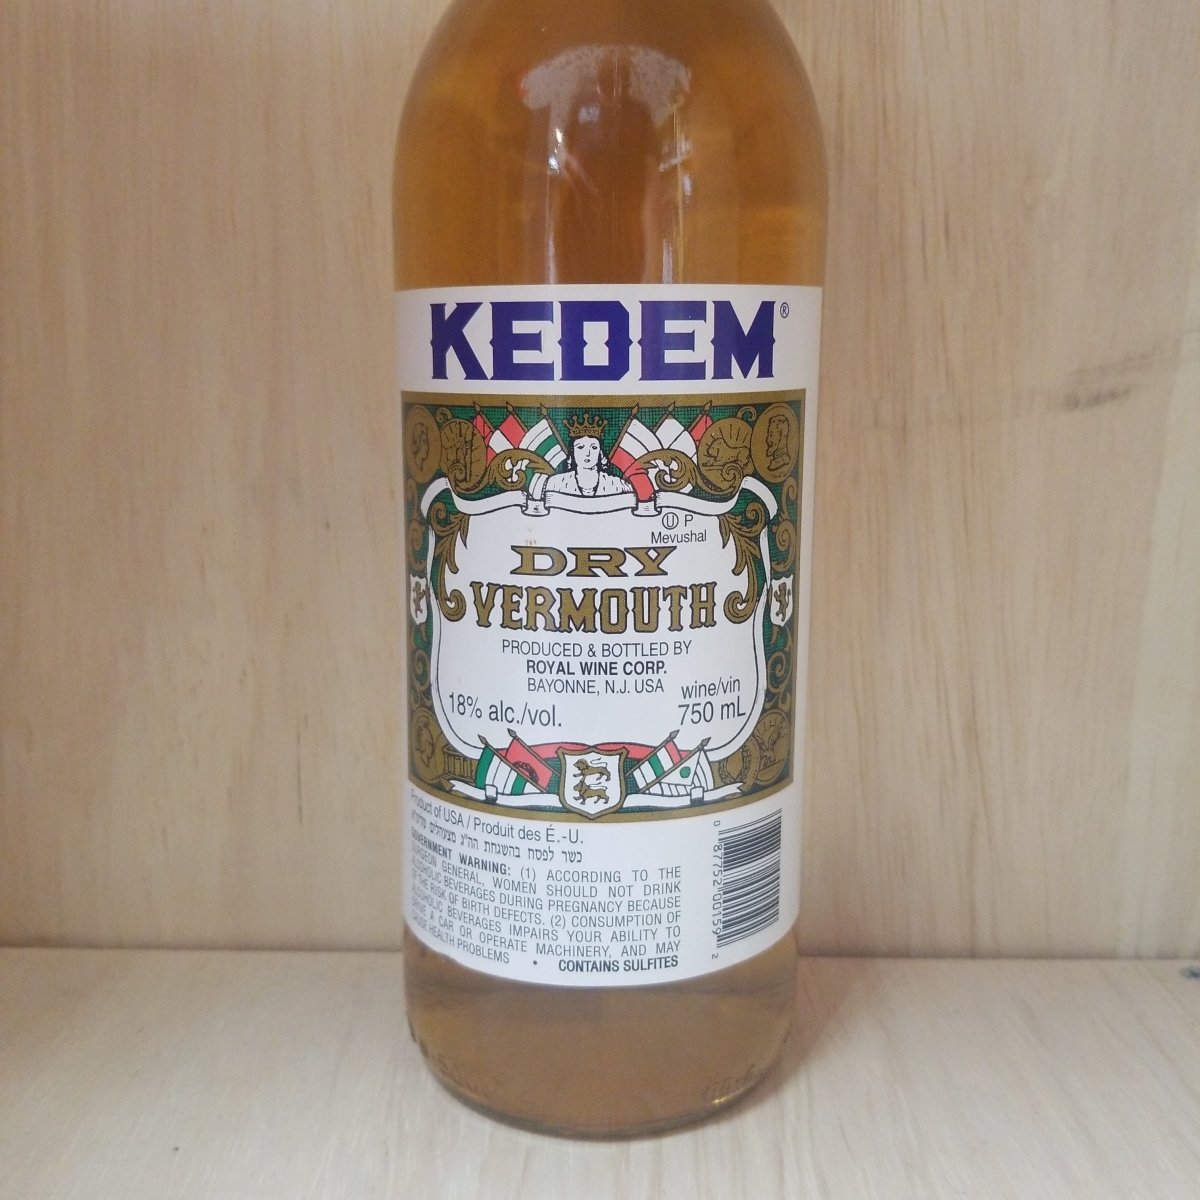 Kedem Dry Vermouth 750ml (Kosher for Passover/Mevushal) - Sip &amp; Say